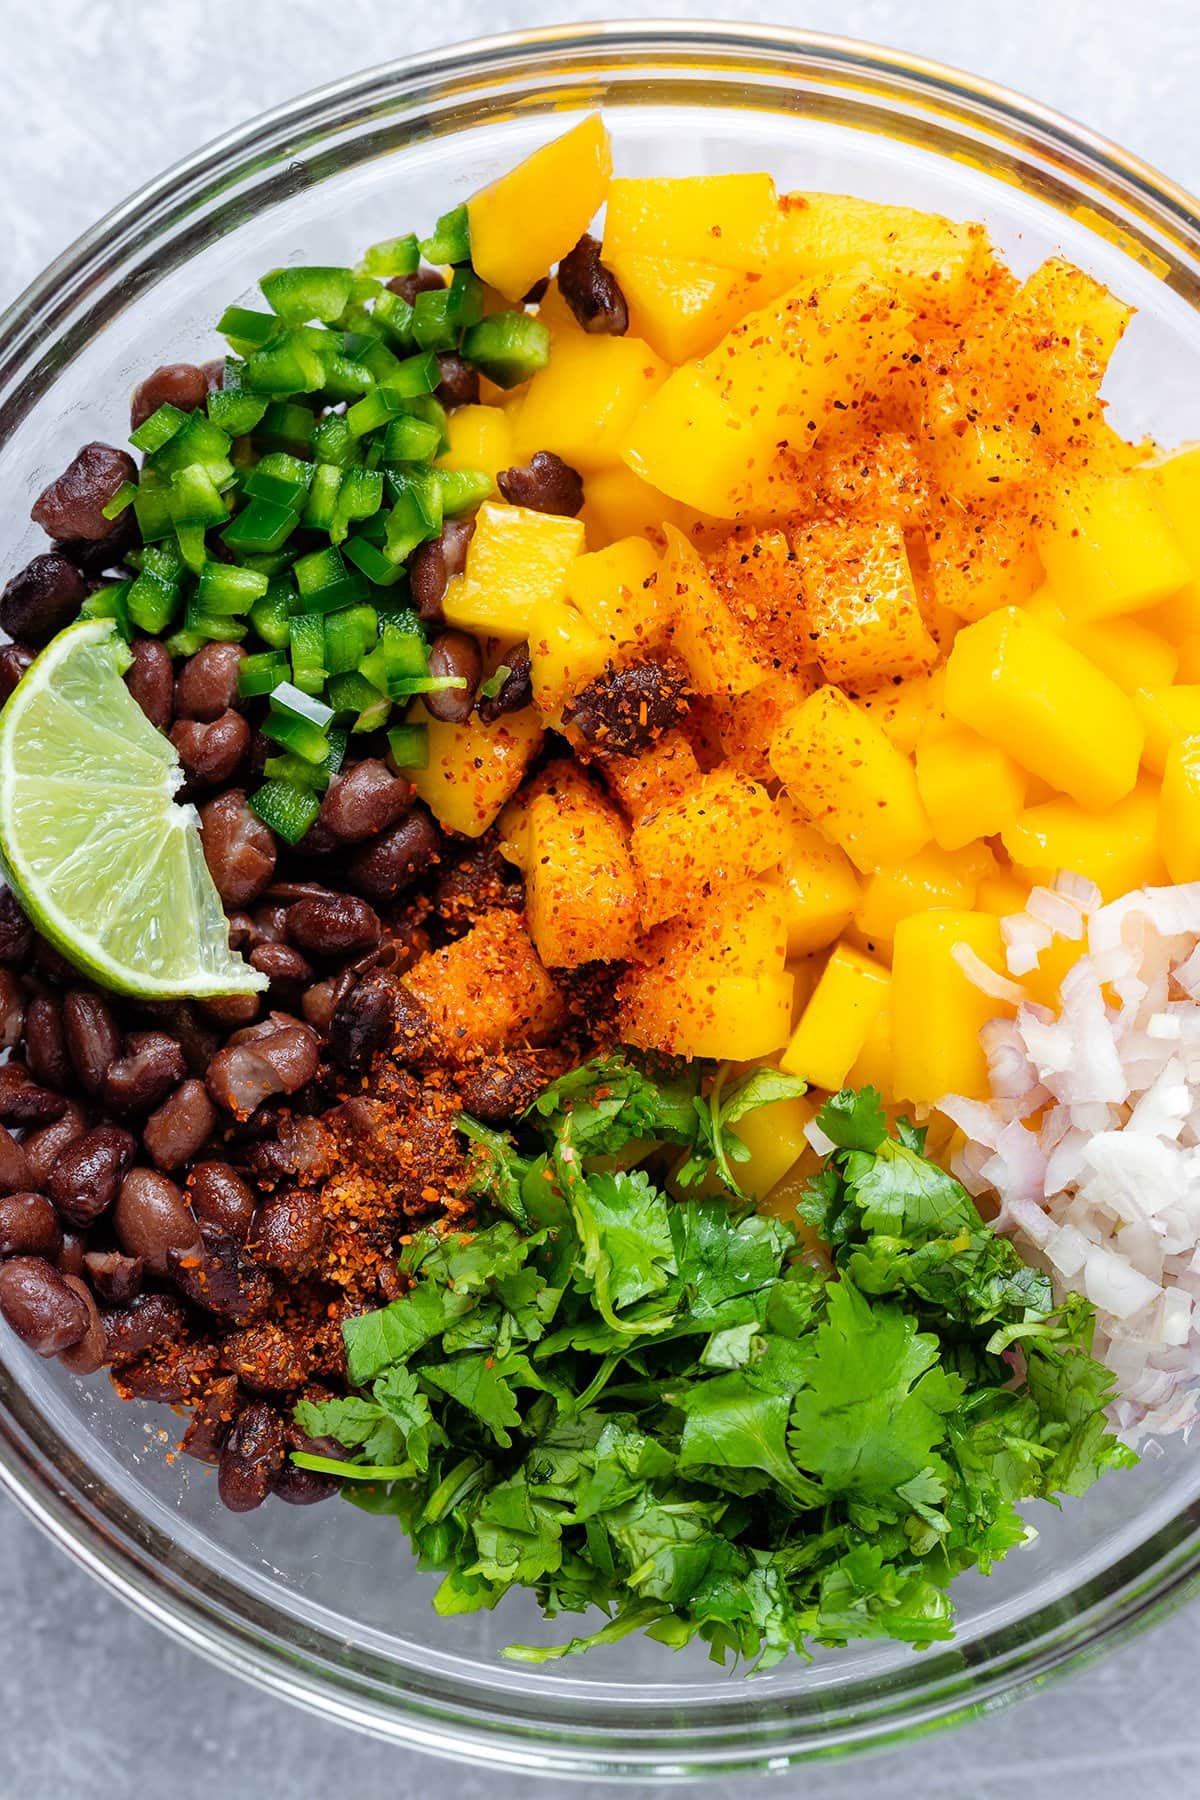 All ingredients for salsa like black beans, diced mango, and fresh cilantro in a glass mixing bowl.